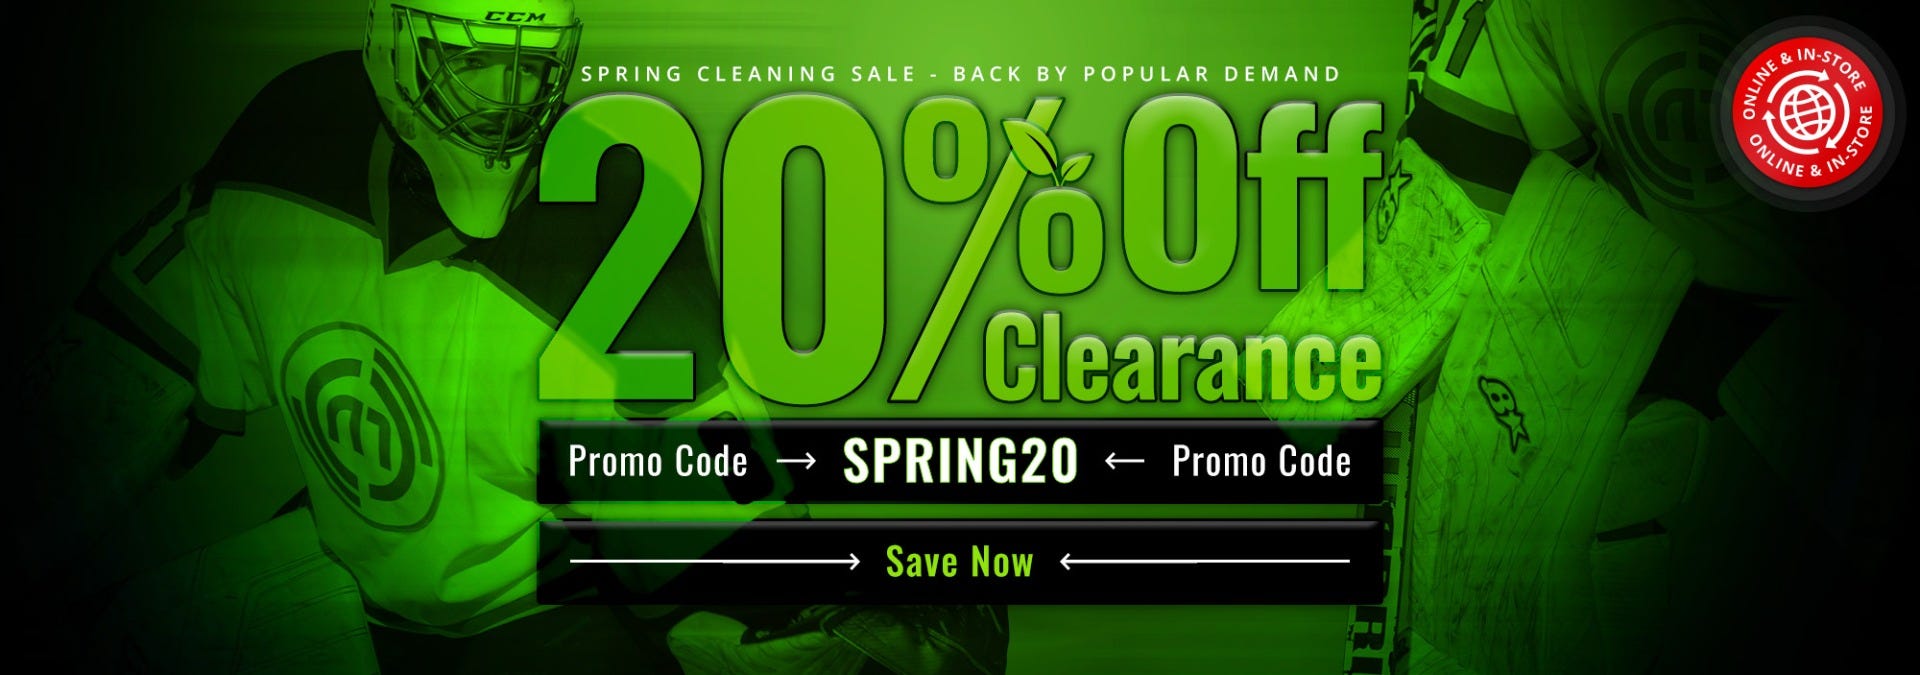 20% Off All Clearance